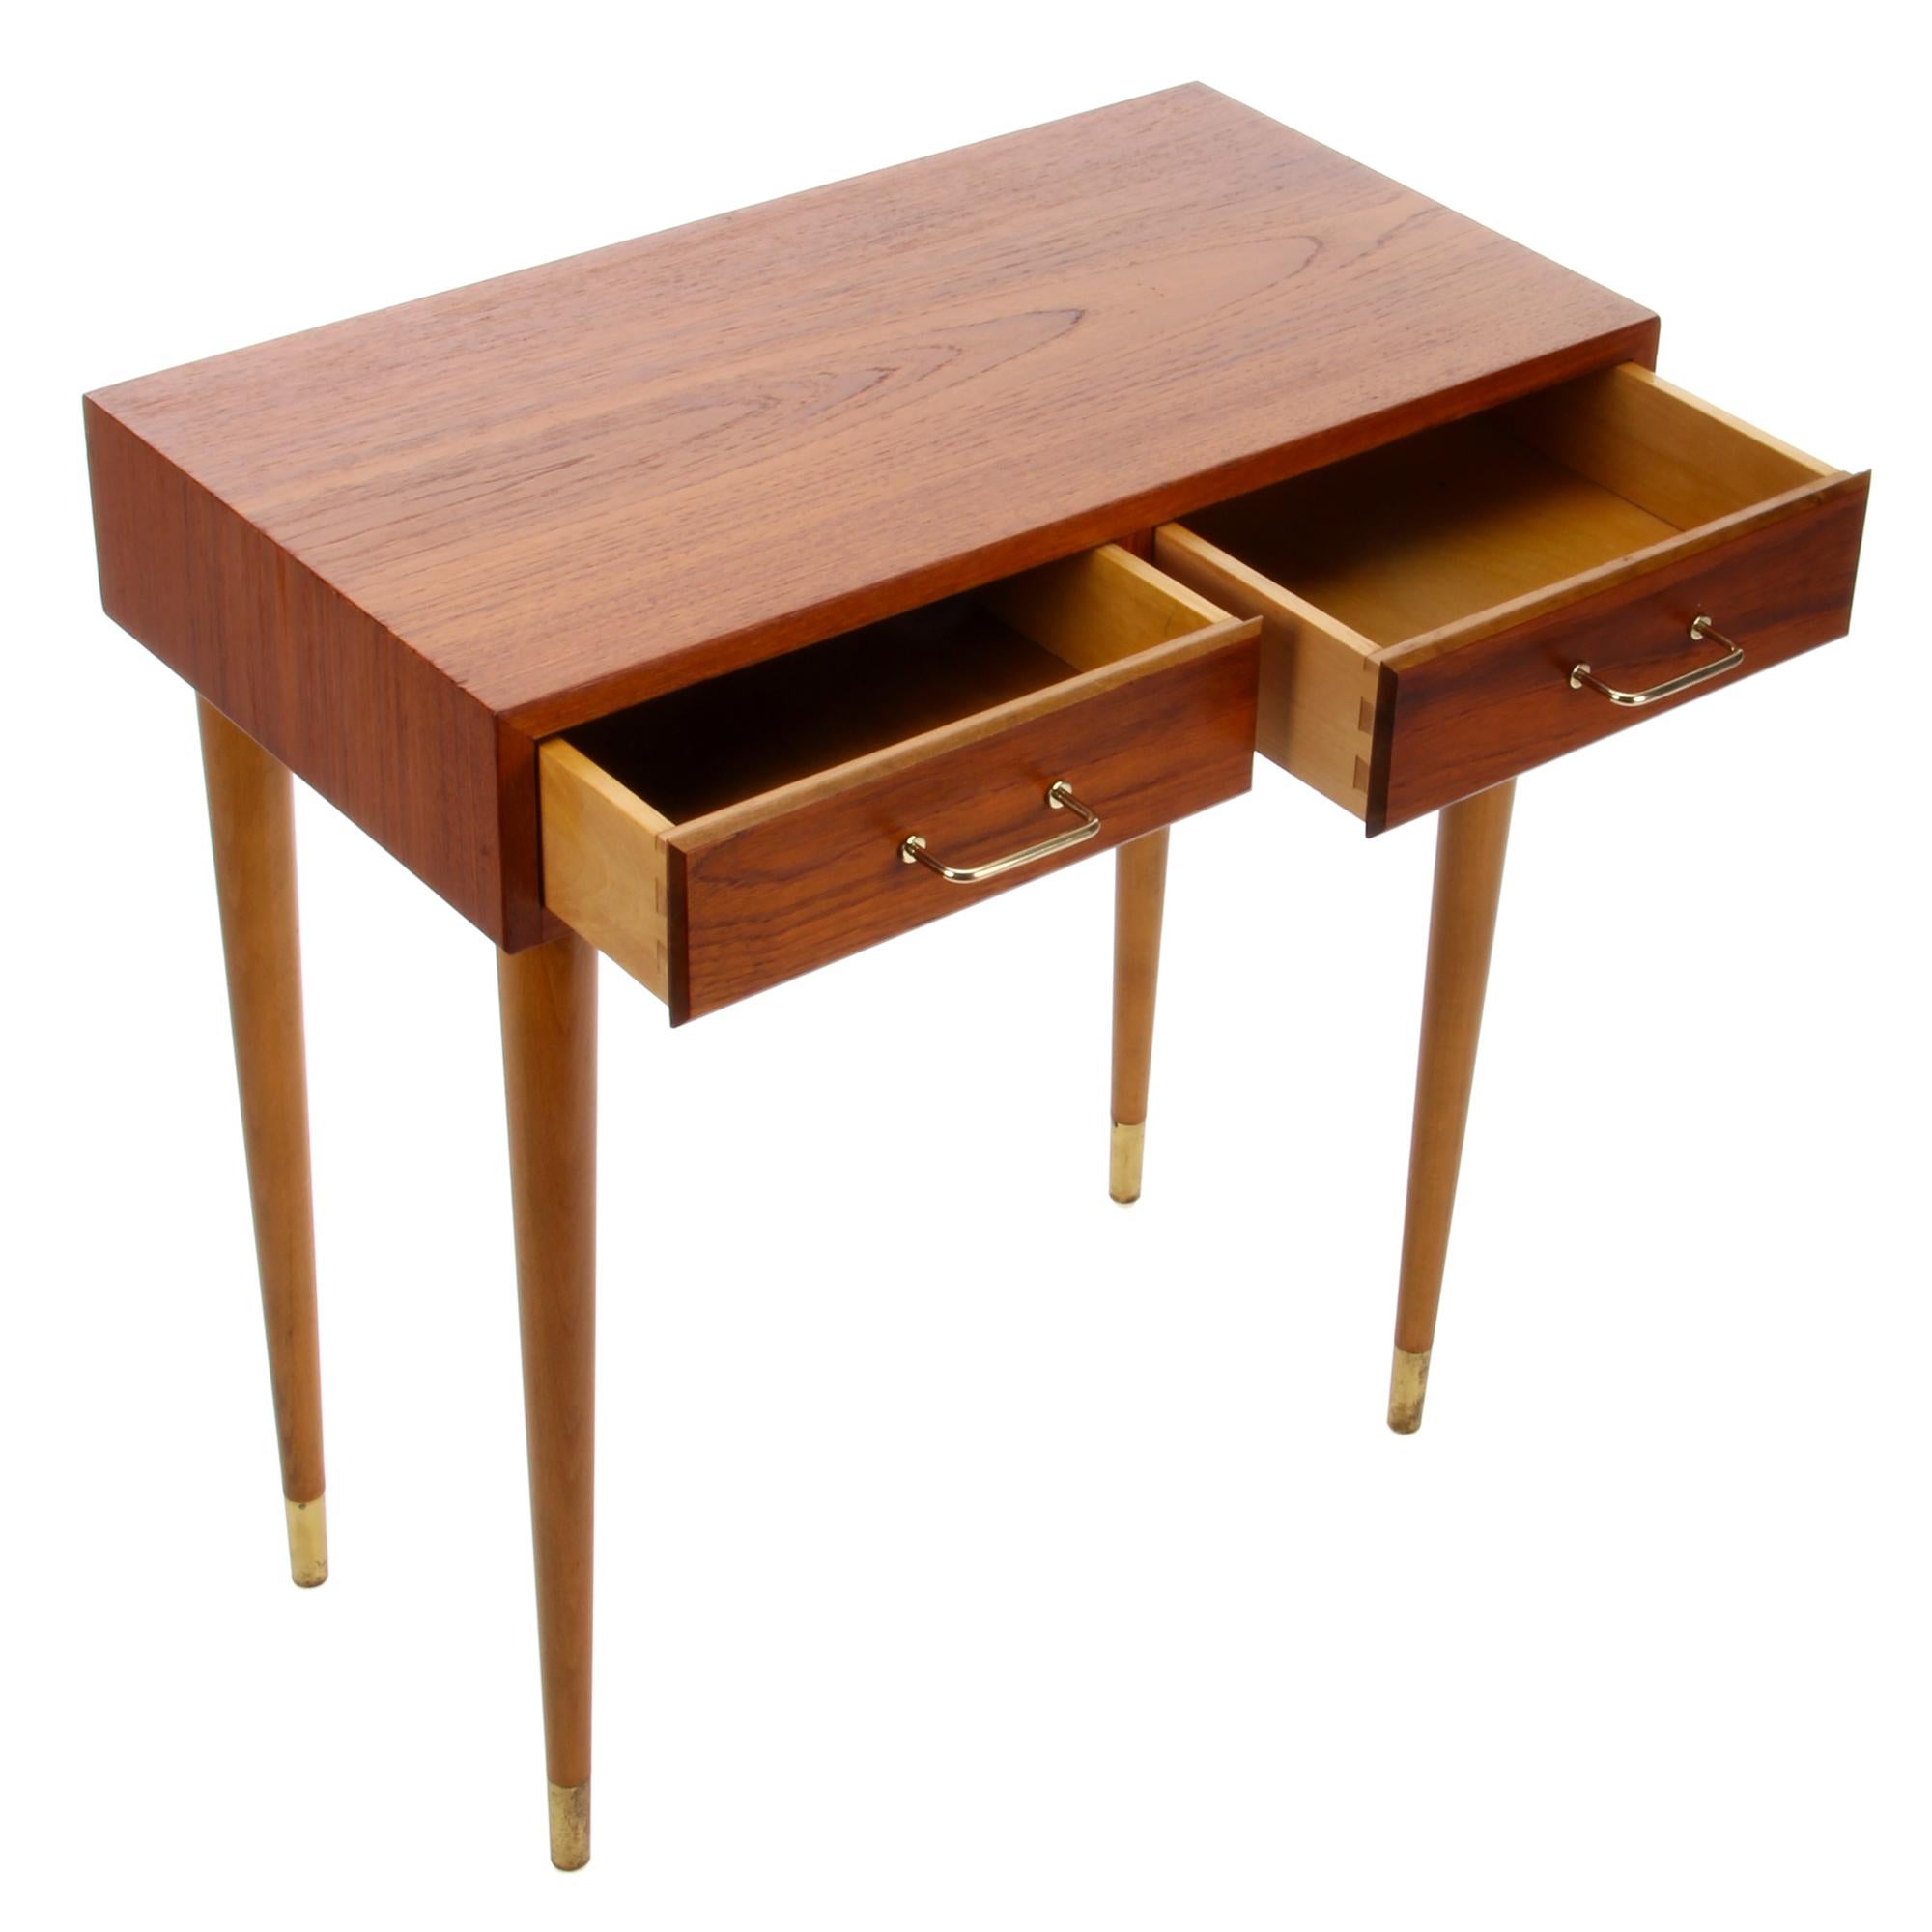 Mid-Century Modern Teak Entry Table, 1960s Danish Console Table or Side Table with Two Drawers